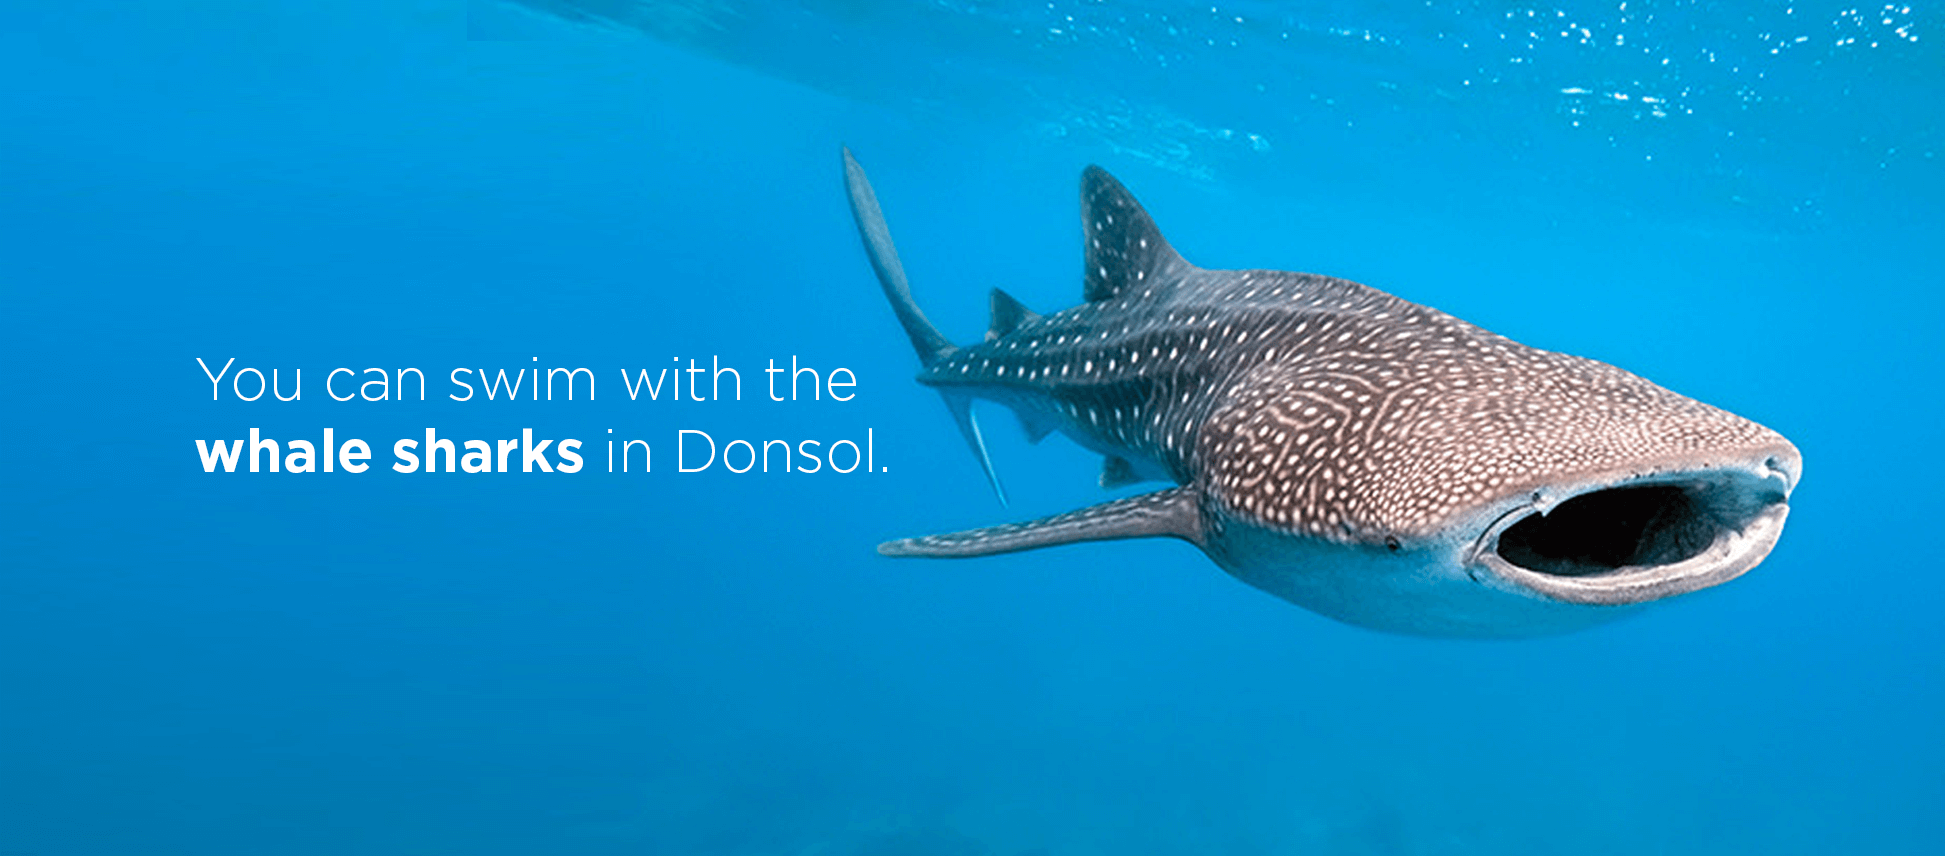 "You can swim with the whale sharks in Donsol."